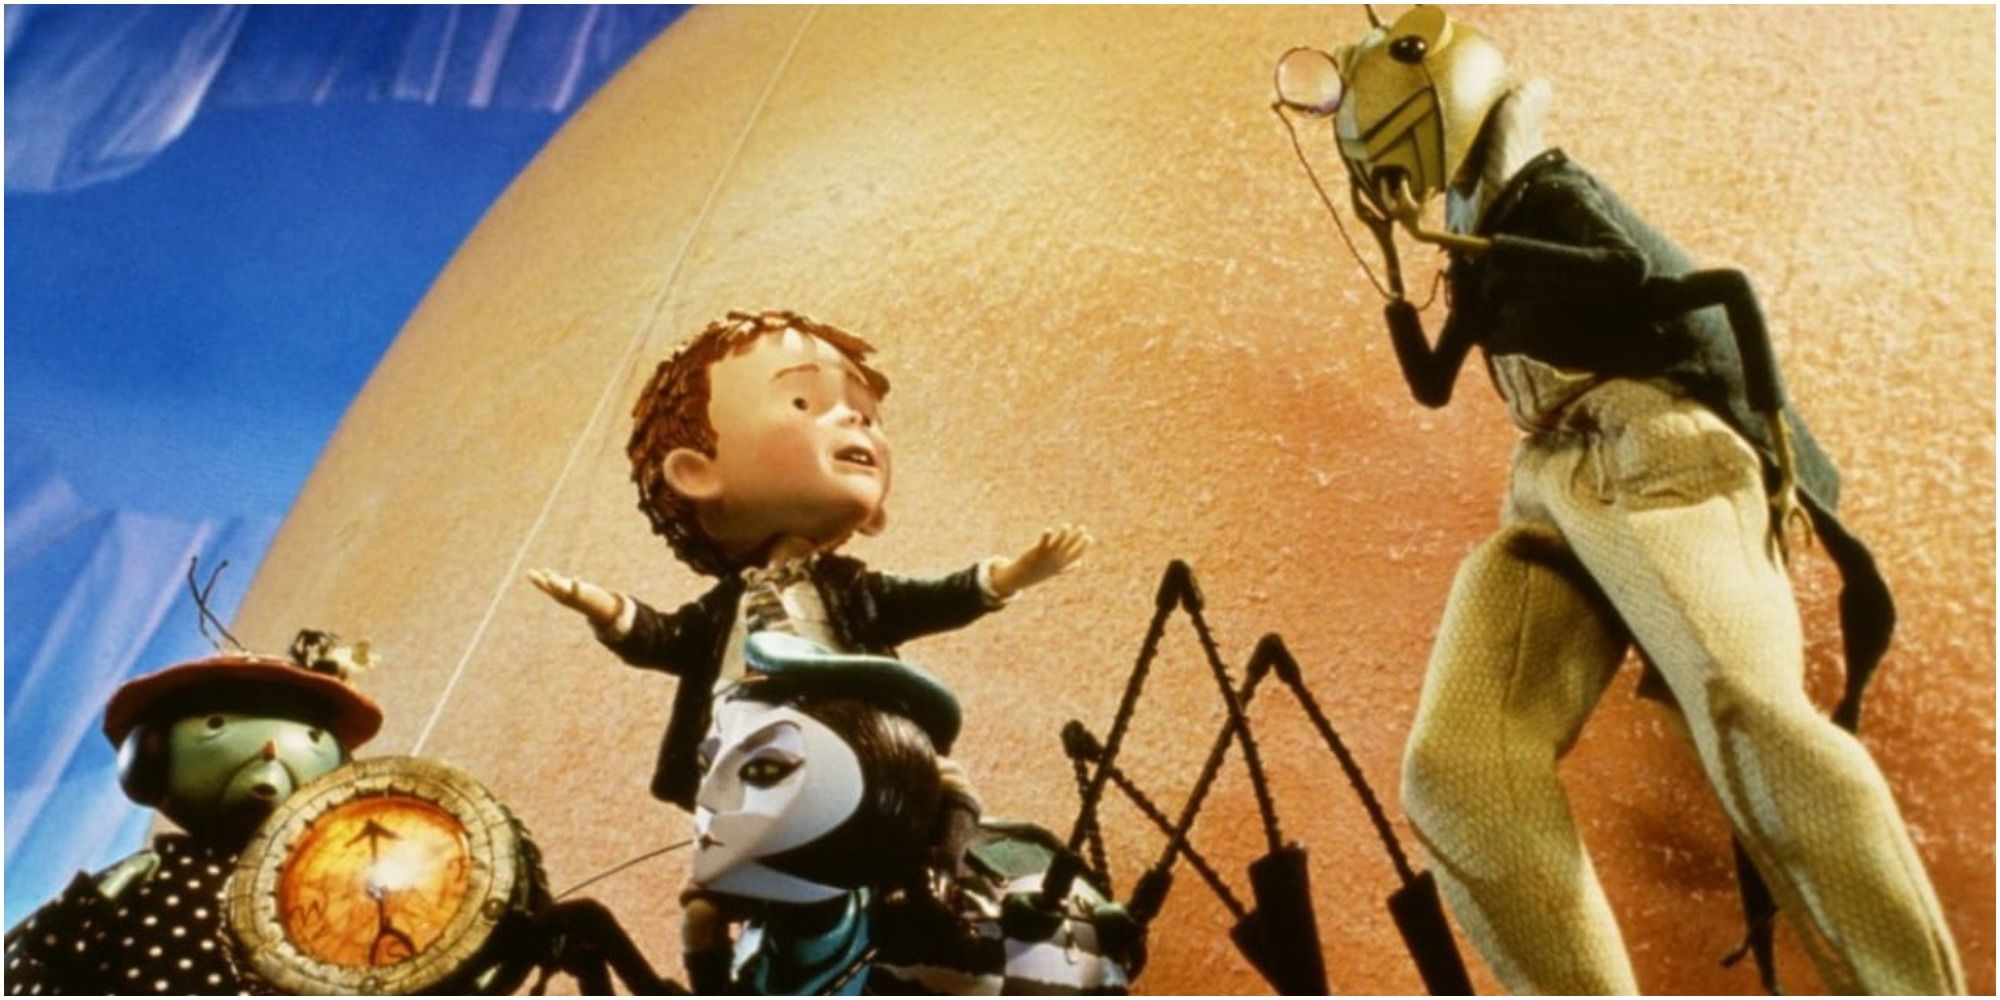 Top 10 Movies Based on Roald Dahl’s Books (According to Rotten Tomatoes)